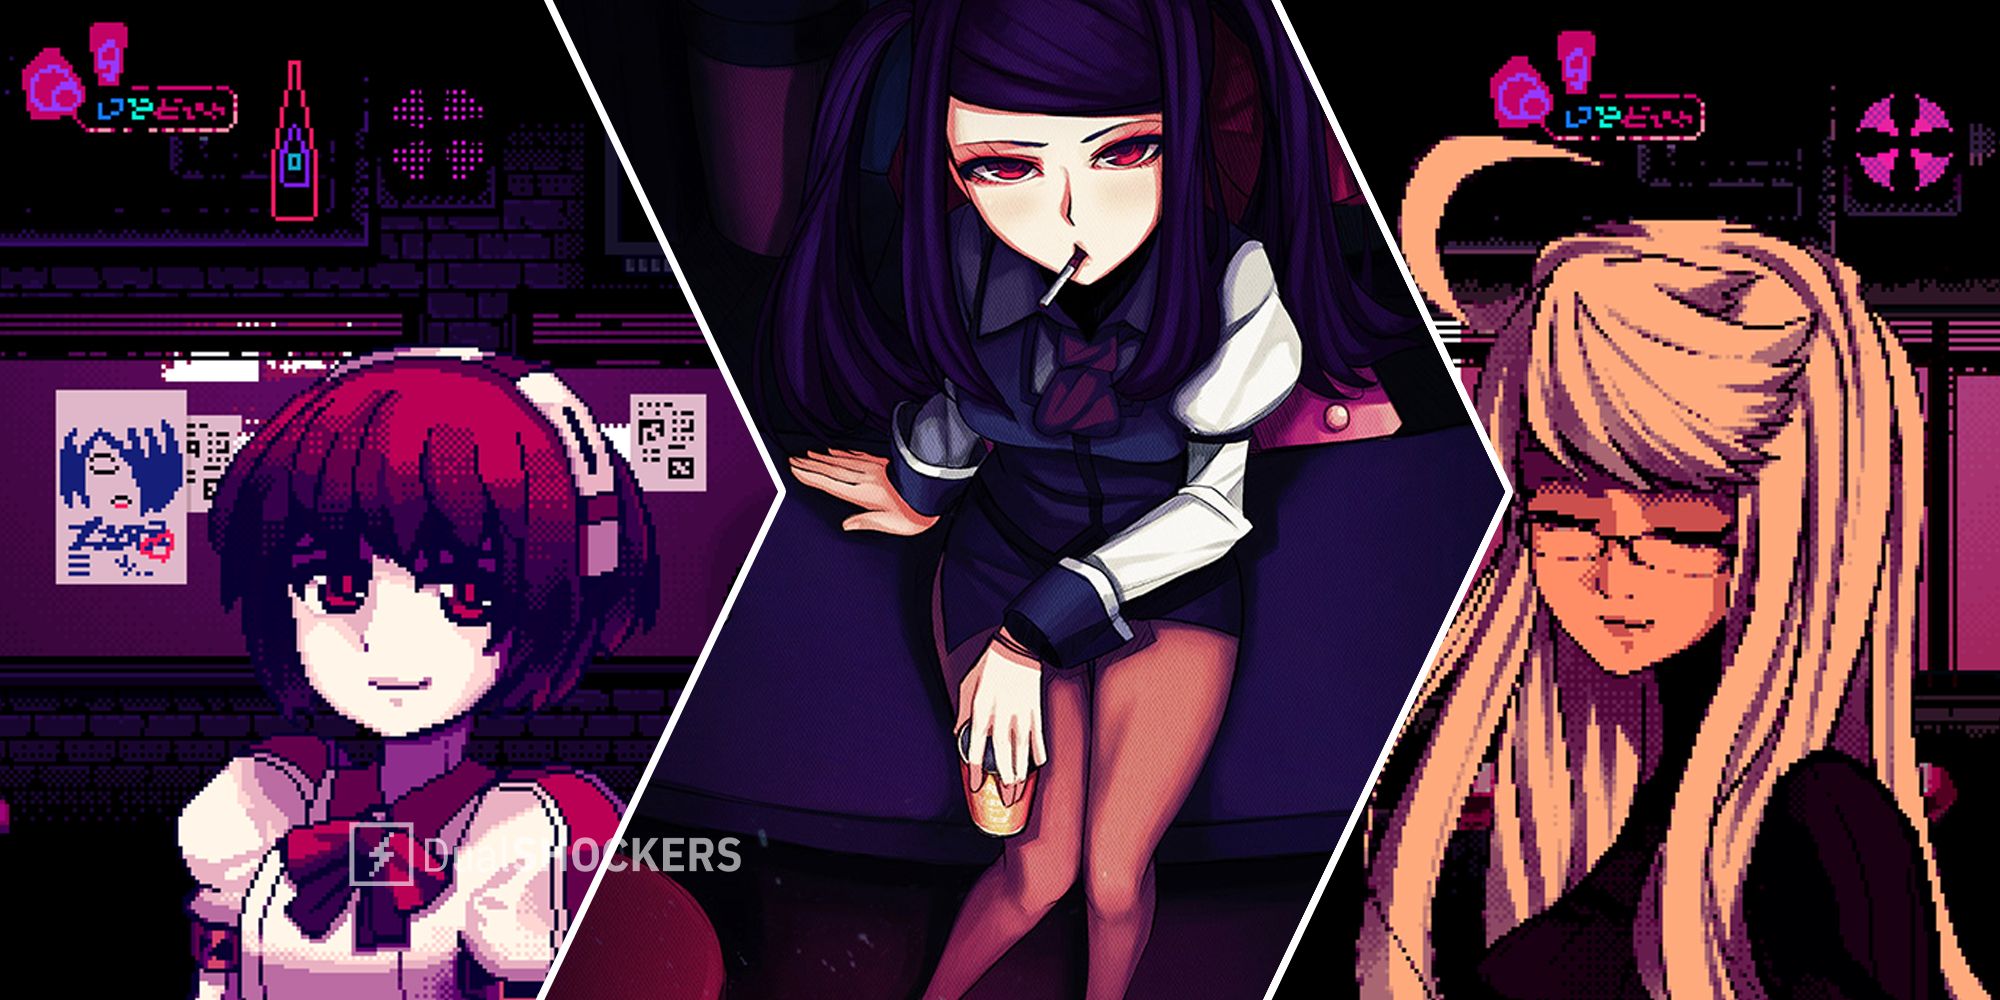 VA-11 Hall-A Dorothy Haze on left, Julianne Stingray in middle, Alma Armas on right